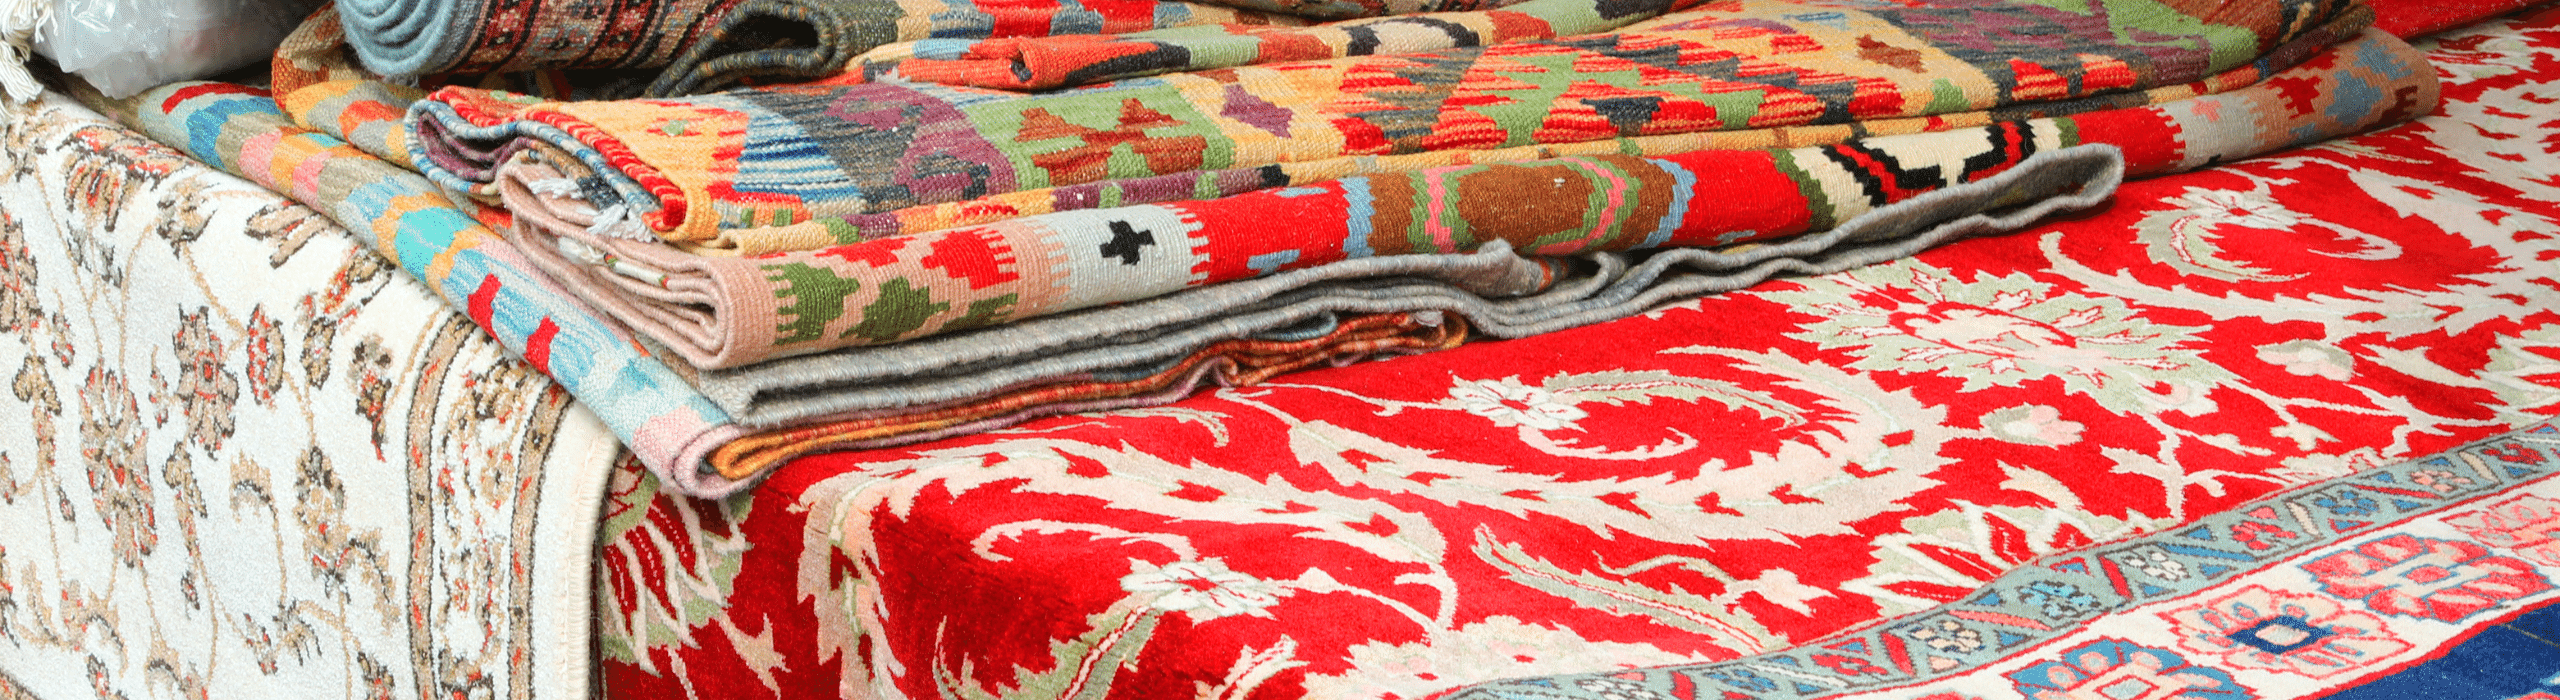 Pile of used Oriental rugs folded on a table